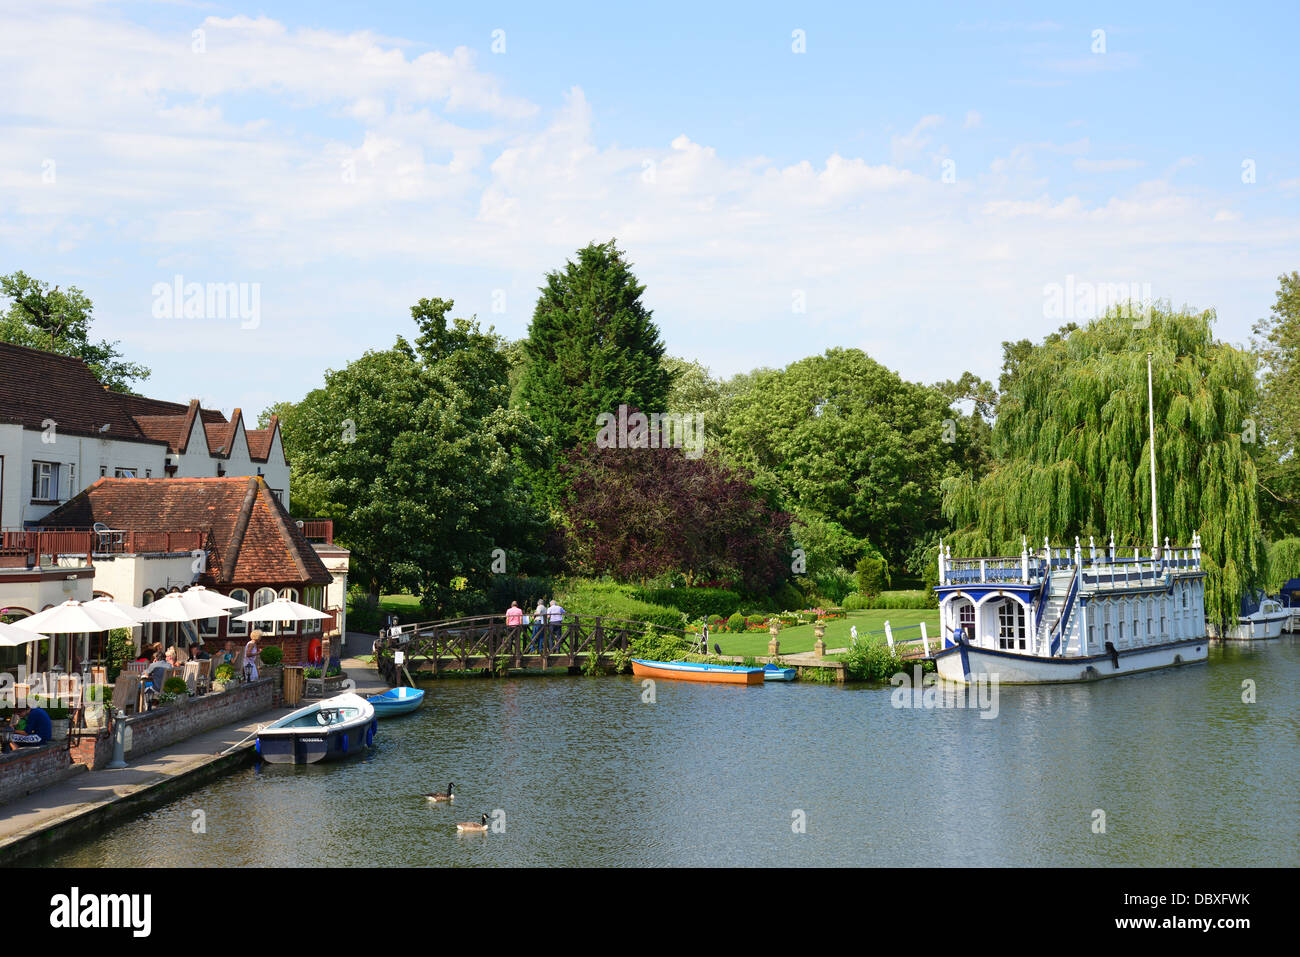 The Swan at Streatley Hotel and River Thames, Streatley, Berkshire, England, United Kingdom Stock Photo